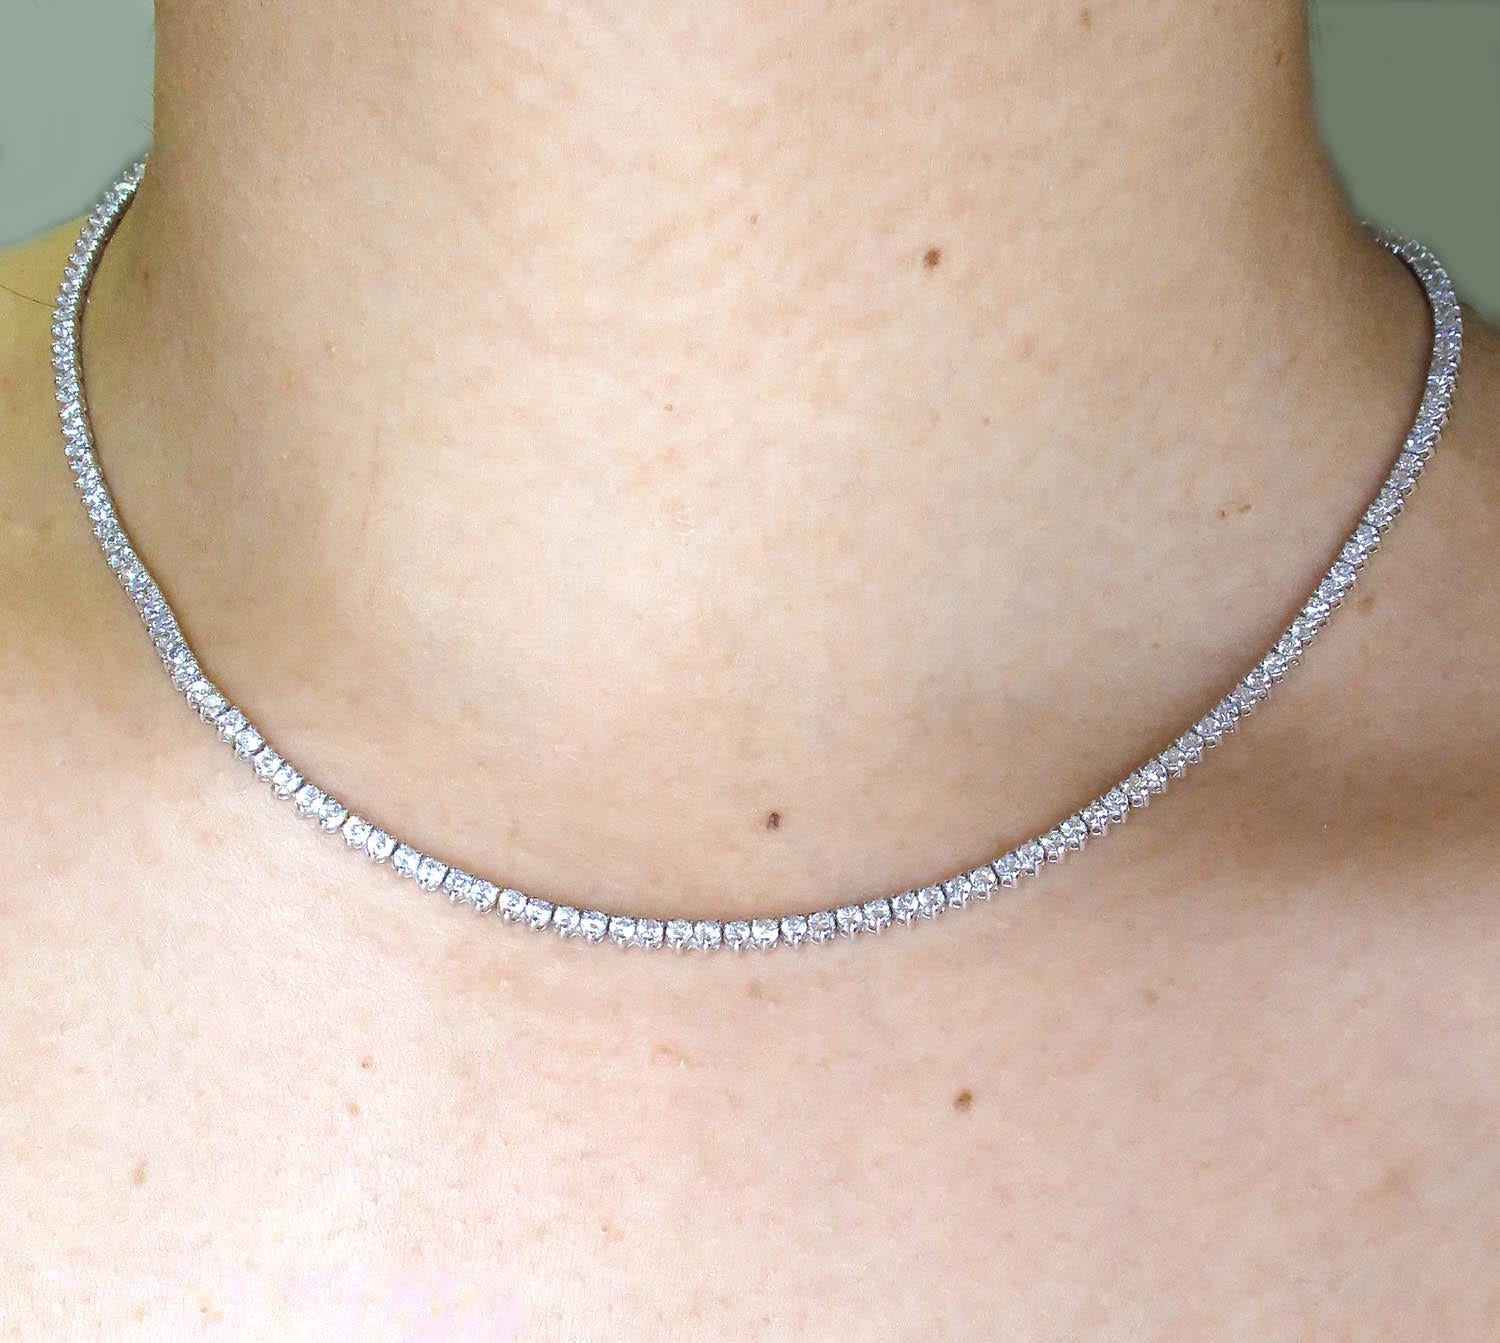 An Amazing Estate Diamond Handmade 14k White gold (stamped) Tennis Necklace with over 184 Round Brilliant Diamonds in G color, VS-SI clarity over all, Gemologic Certified. Estimated total weight of the diamonds is 7.50ctw.
The length of the necklace